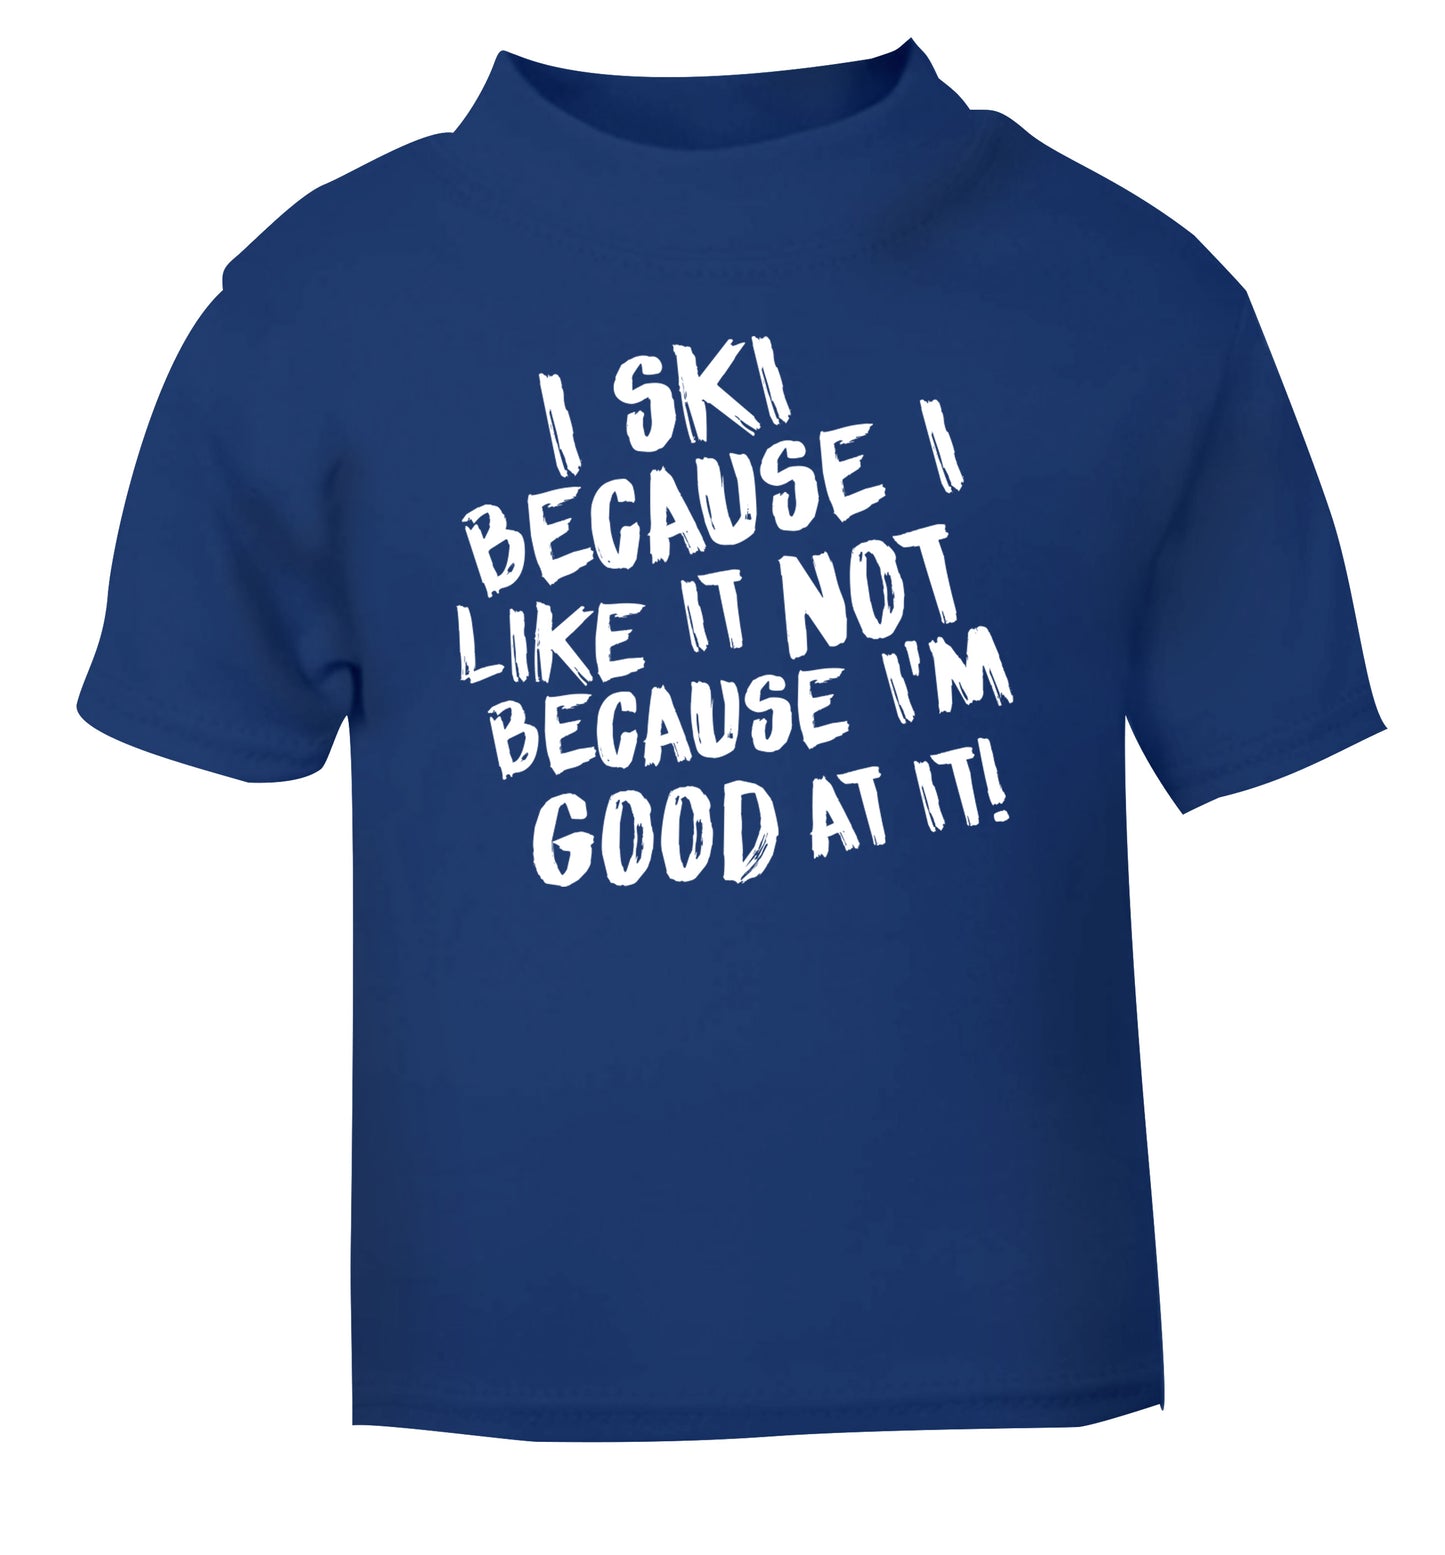 I ski because I like it not because I'm good at it blue Baby Toddler Tshirt 2 Years